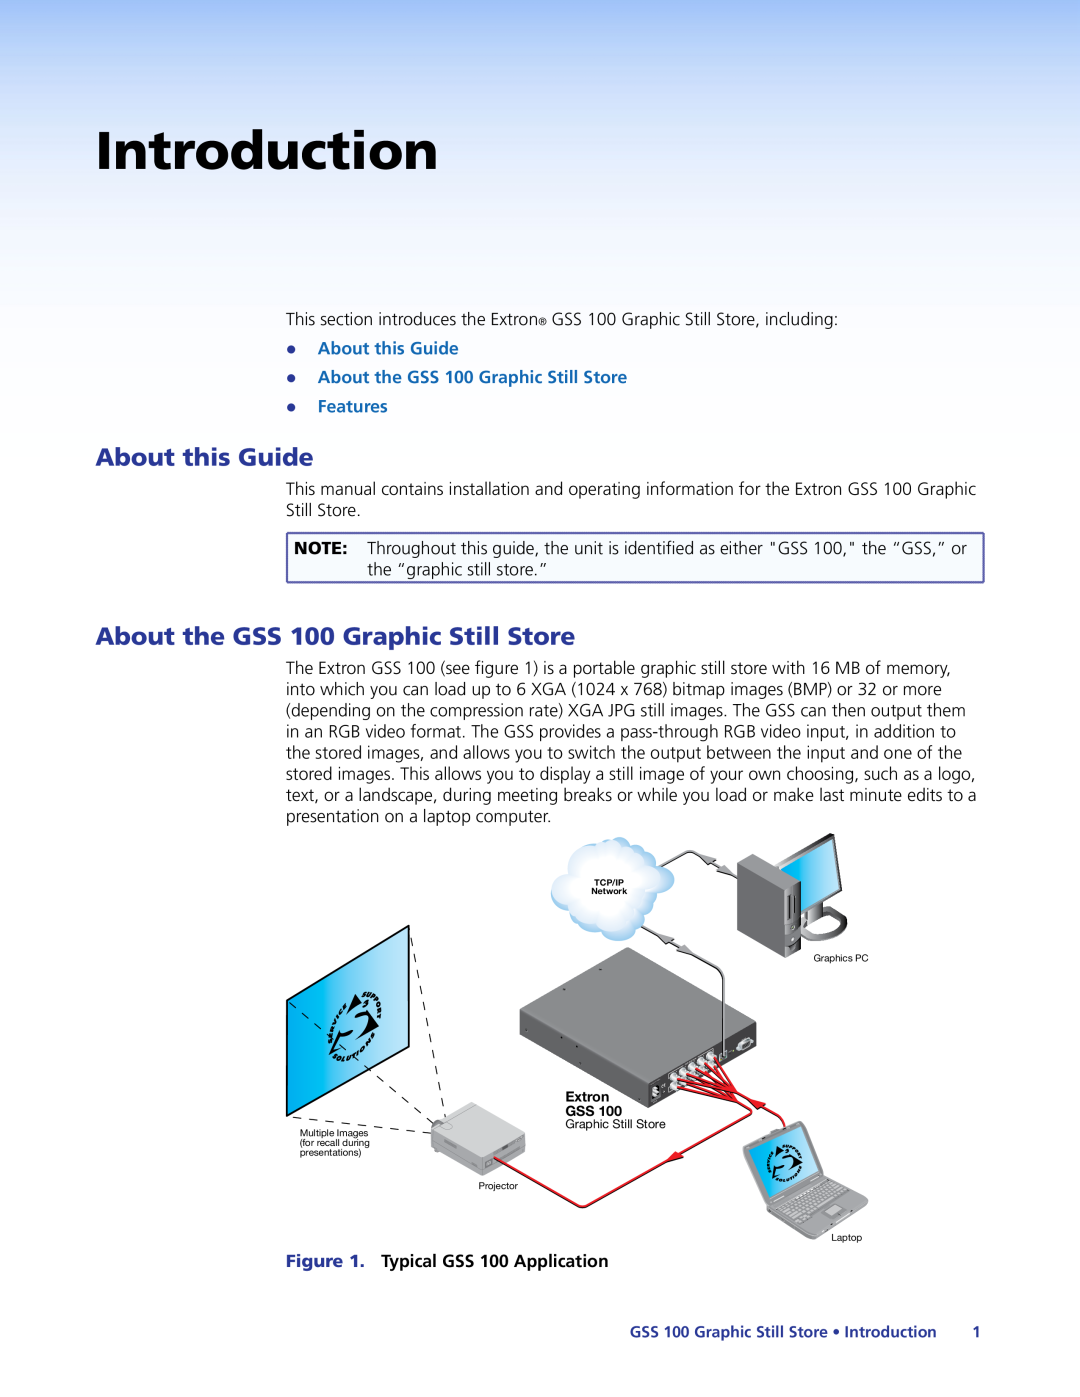 Extron electronic manual Introduction, About the GSS 100 Graphic Still Store, zzAbout this Guide 